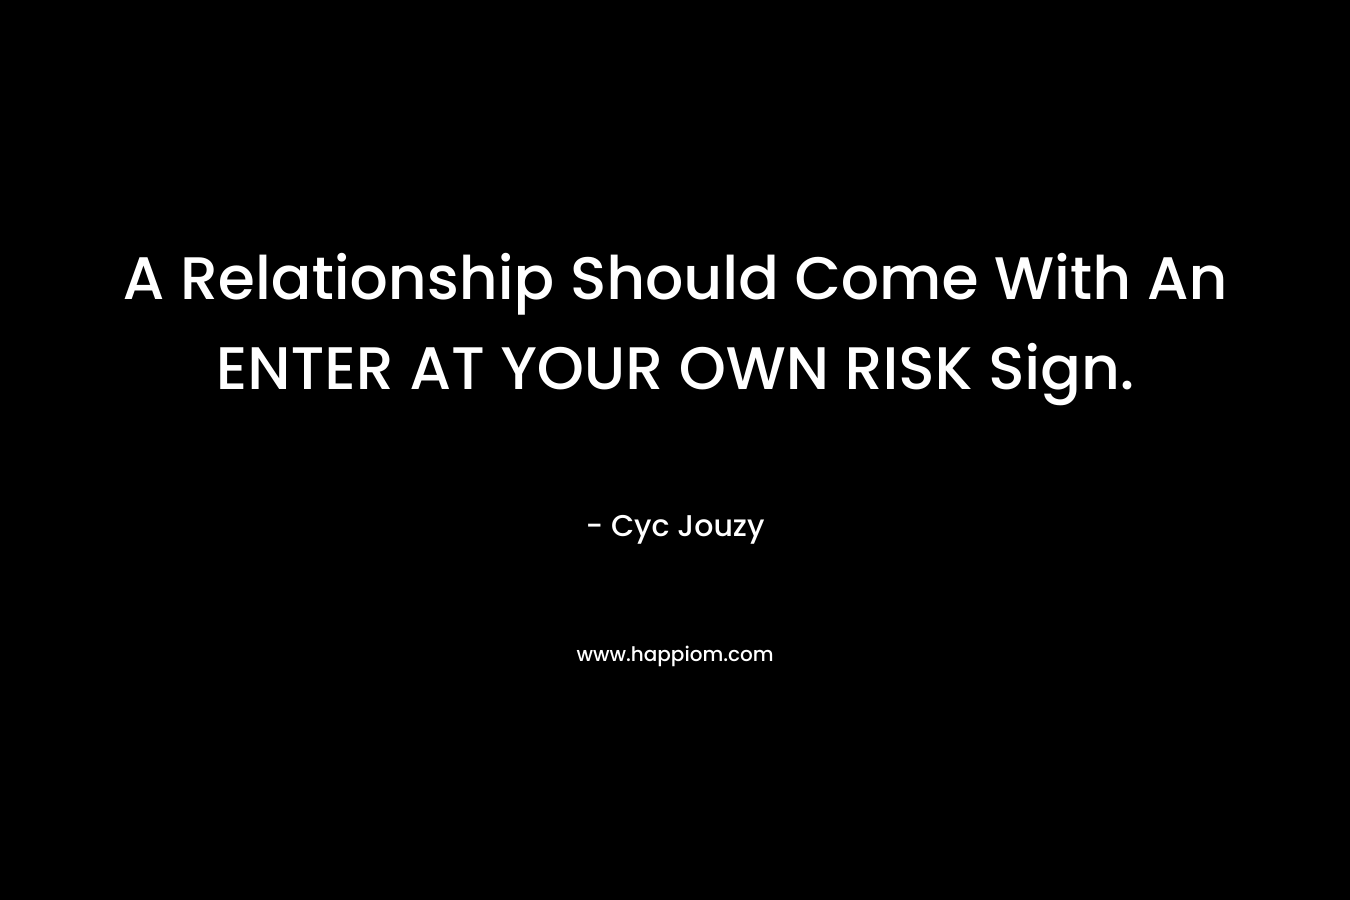 A Relationship Should Come With An ENTER AT YOUR OWN RISK Sign.